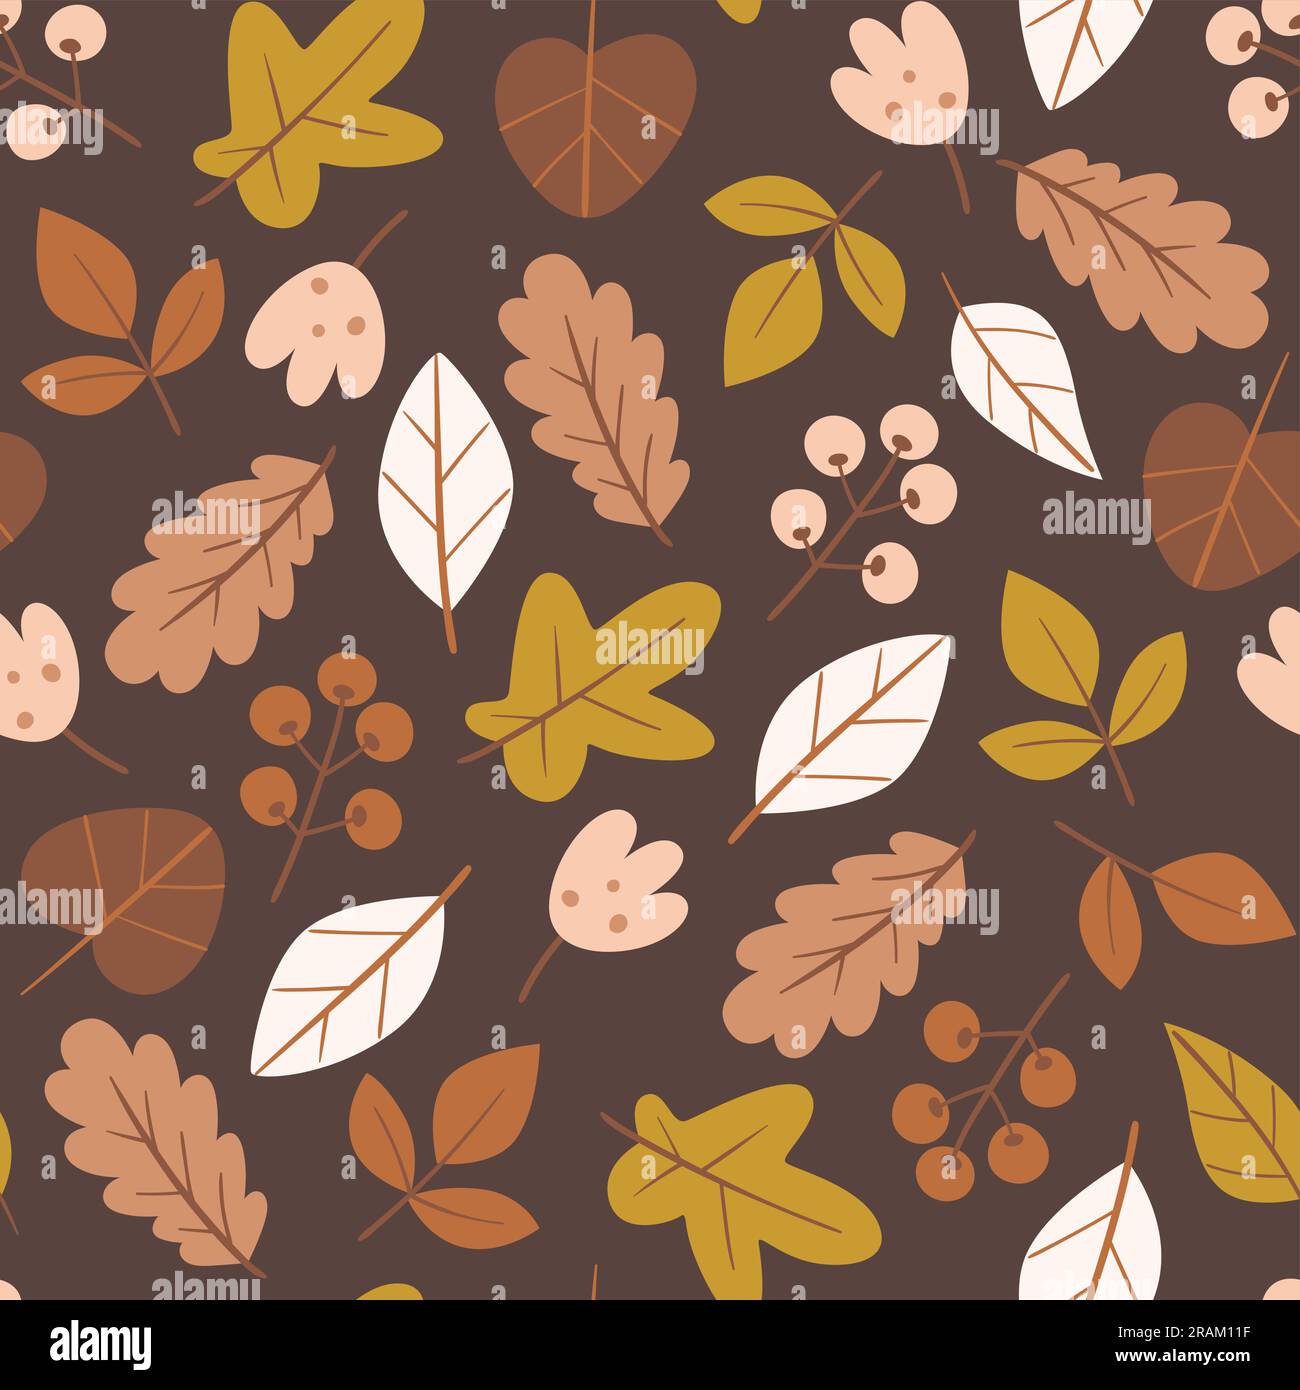 Vector seamless pattern with leaves and berries in cozy colors